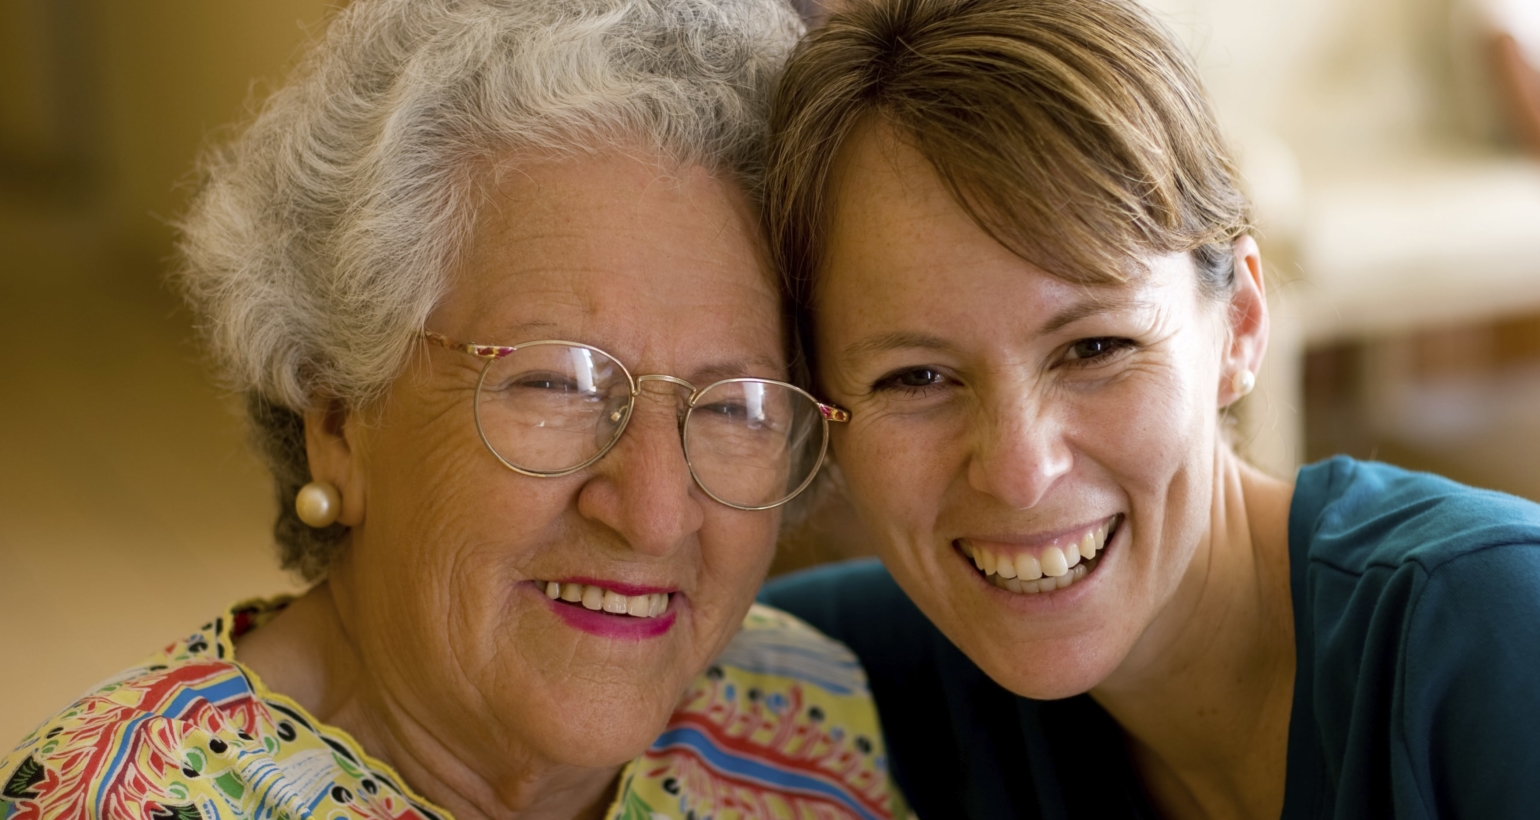 Caregiver with an elderly woman